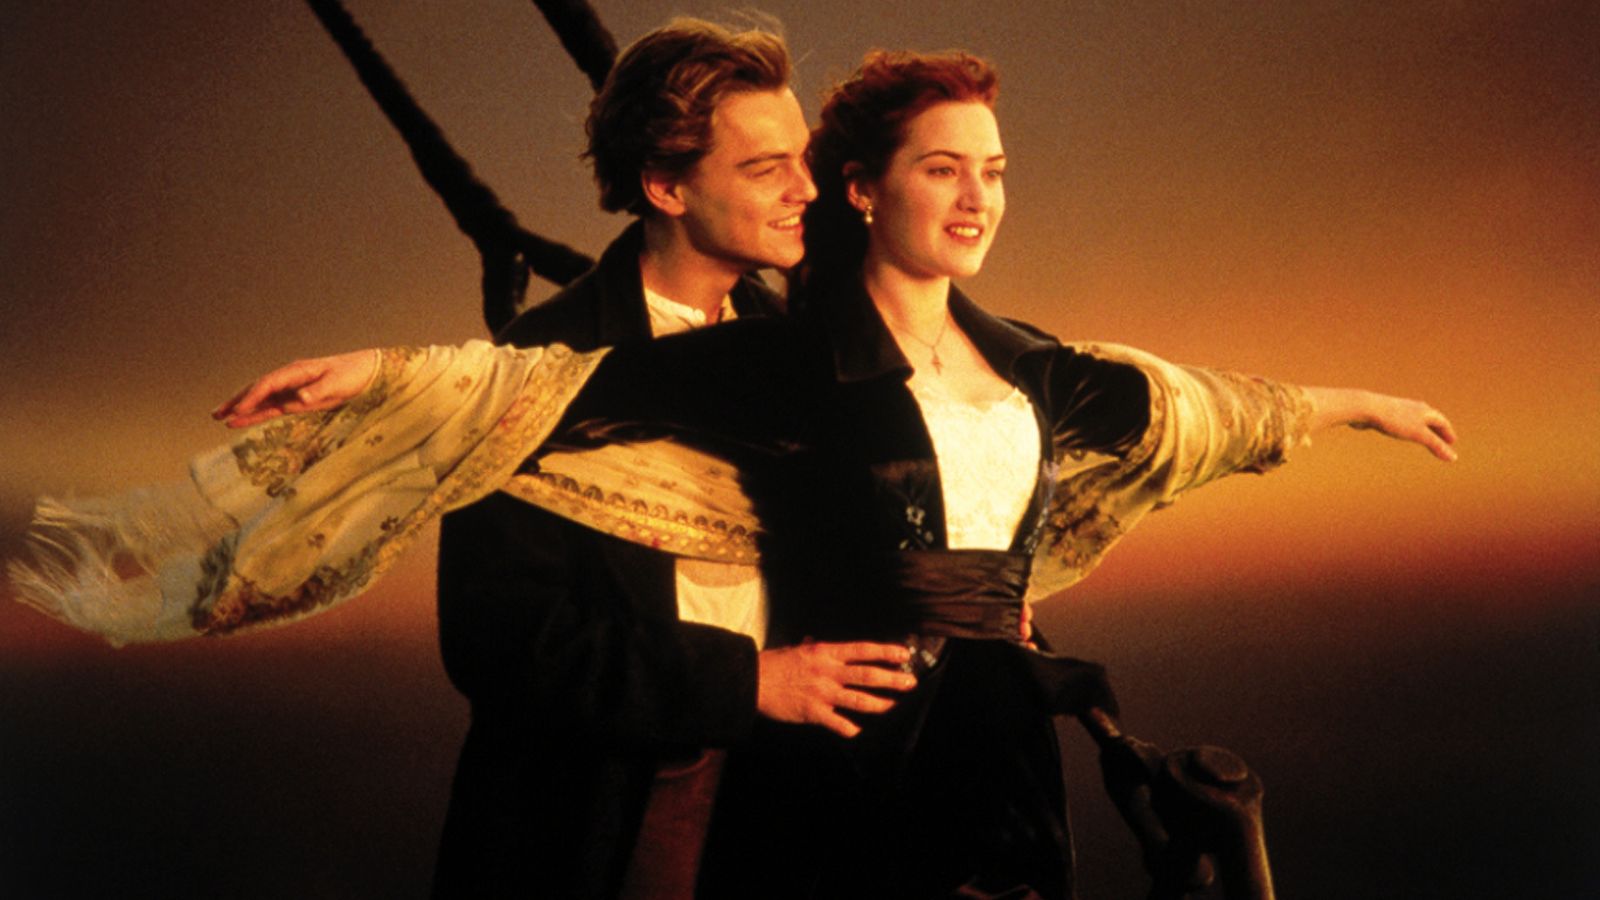 Leonardo DiCaprio Reflects on Filming 'Titanic' With Kate Winslet ...